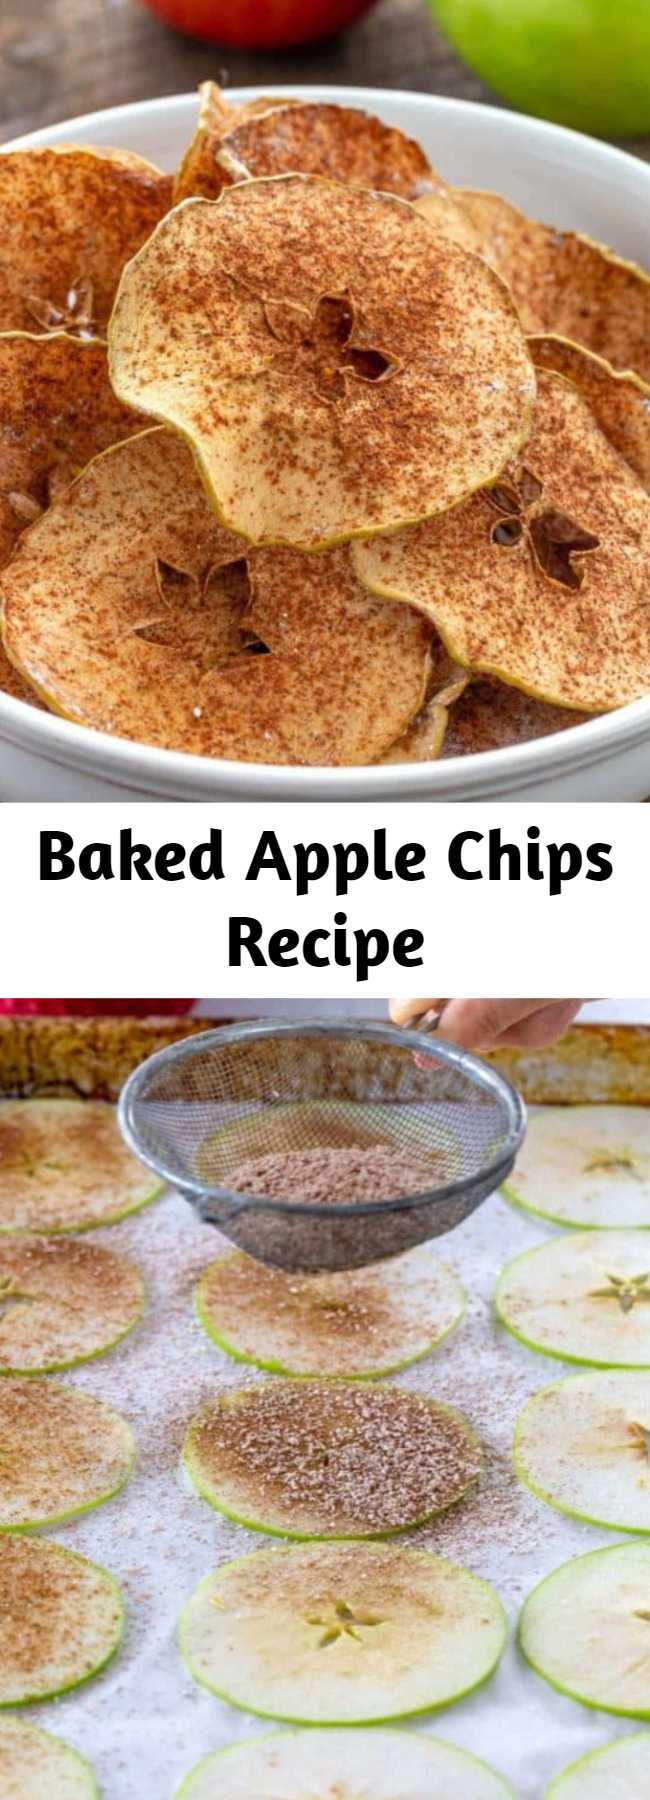 Baked Apple Chips Recipe - Chose your favorite apple variety to make these simple and healthy baked cinnamon apple chips! Cinnamon enhances the flavor while cutting the apples into thin slices, and baking at a low oven temperature for a few hours ensures super crispy chips. These crisp apple chips are delicious and addicting, without the guilt!